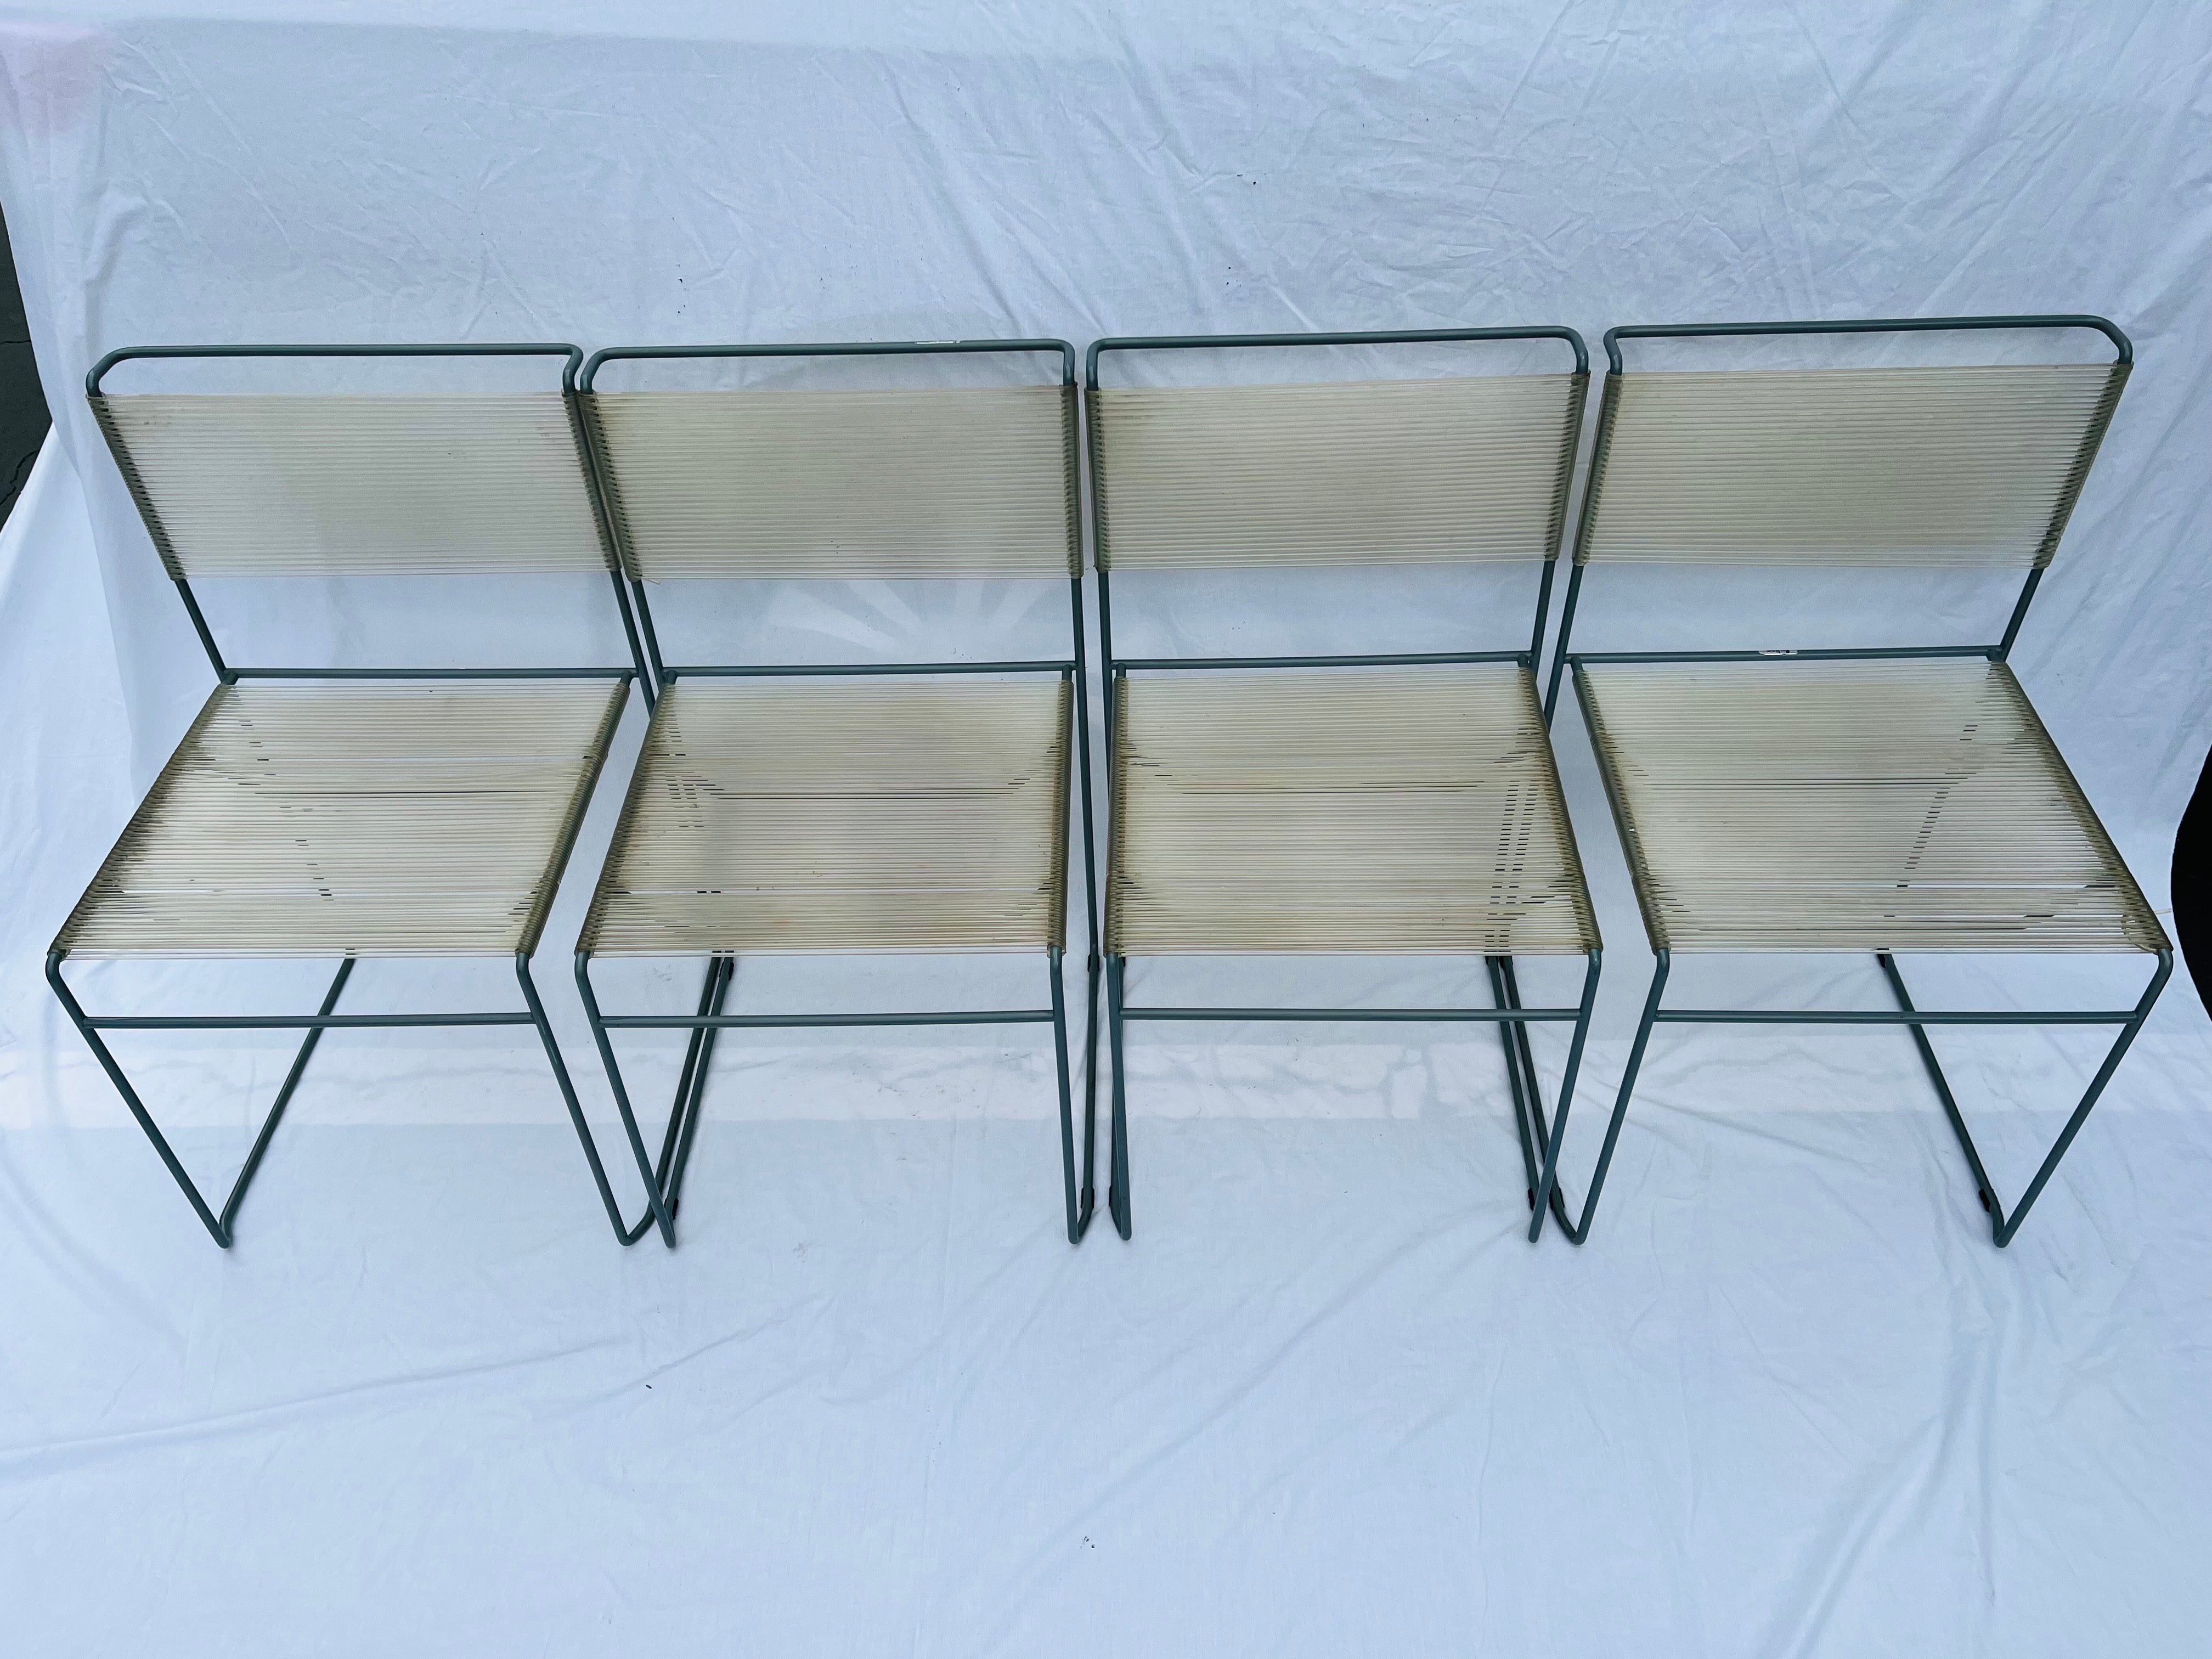 A vintage set of four circa 1970's first edition Fly Line Spaghetto chairs. These spaghetti strap style chairs have great post modern style metal frames. The PVC tubular strap seats and backs are in a semi translucent color. The paint coated metal